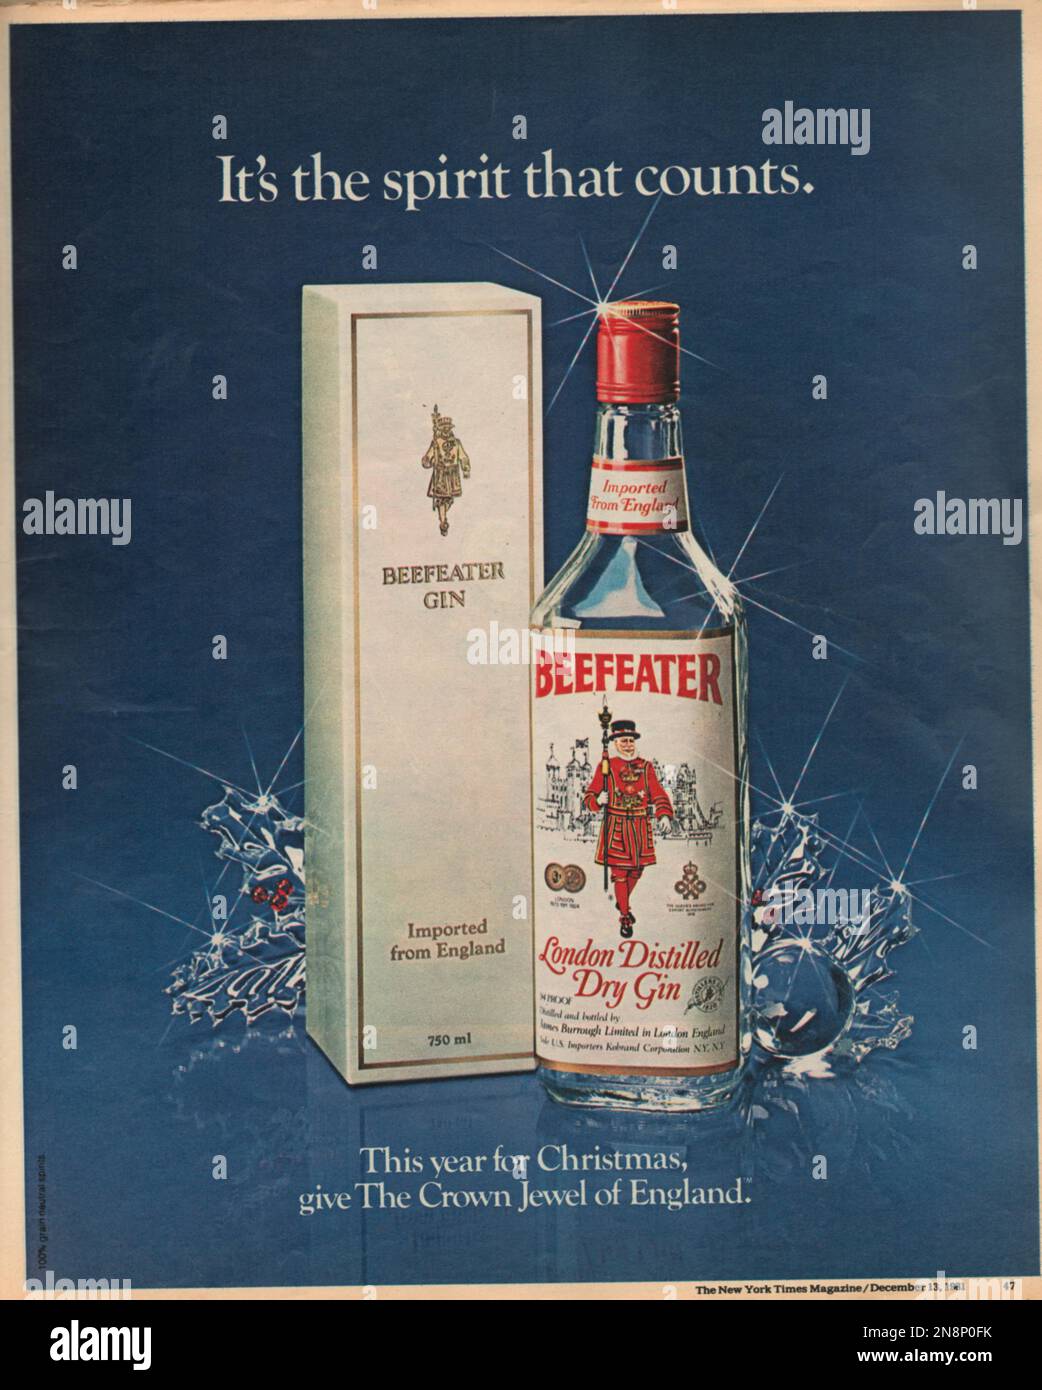 Beefeater London Distilled Dry gin magazine advertisement 1981, paper advertt the New York Times magazine Foto Stock